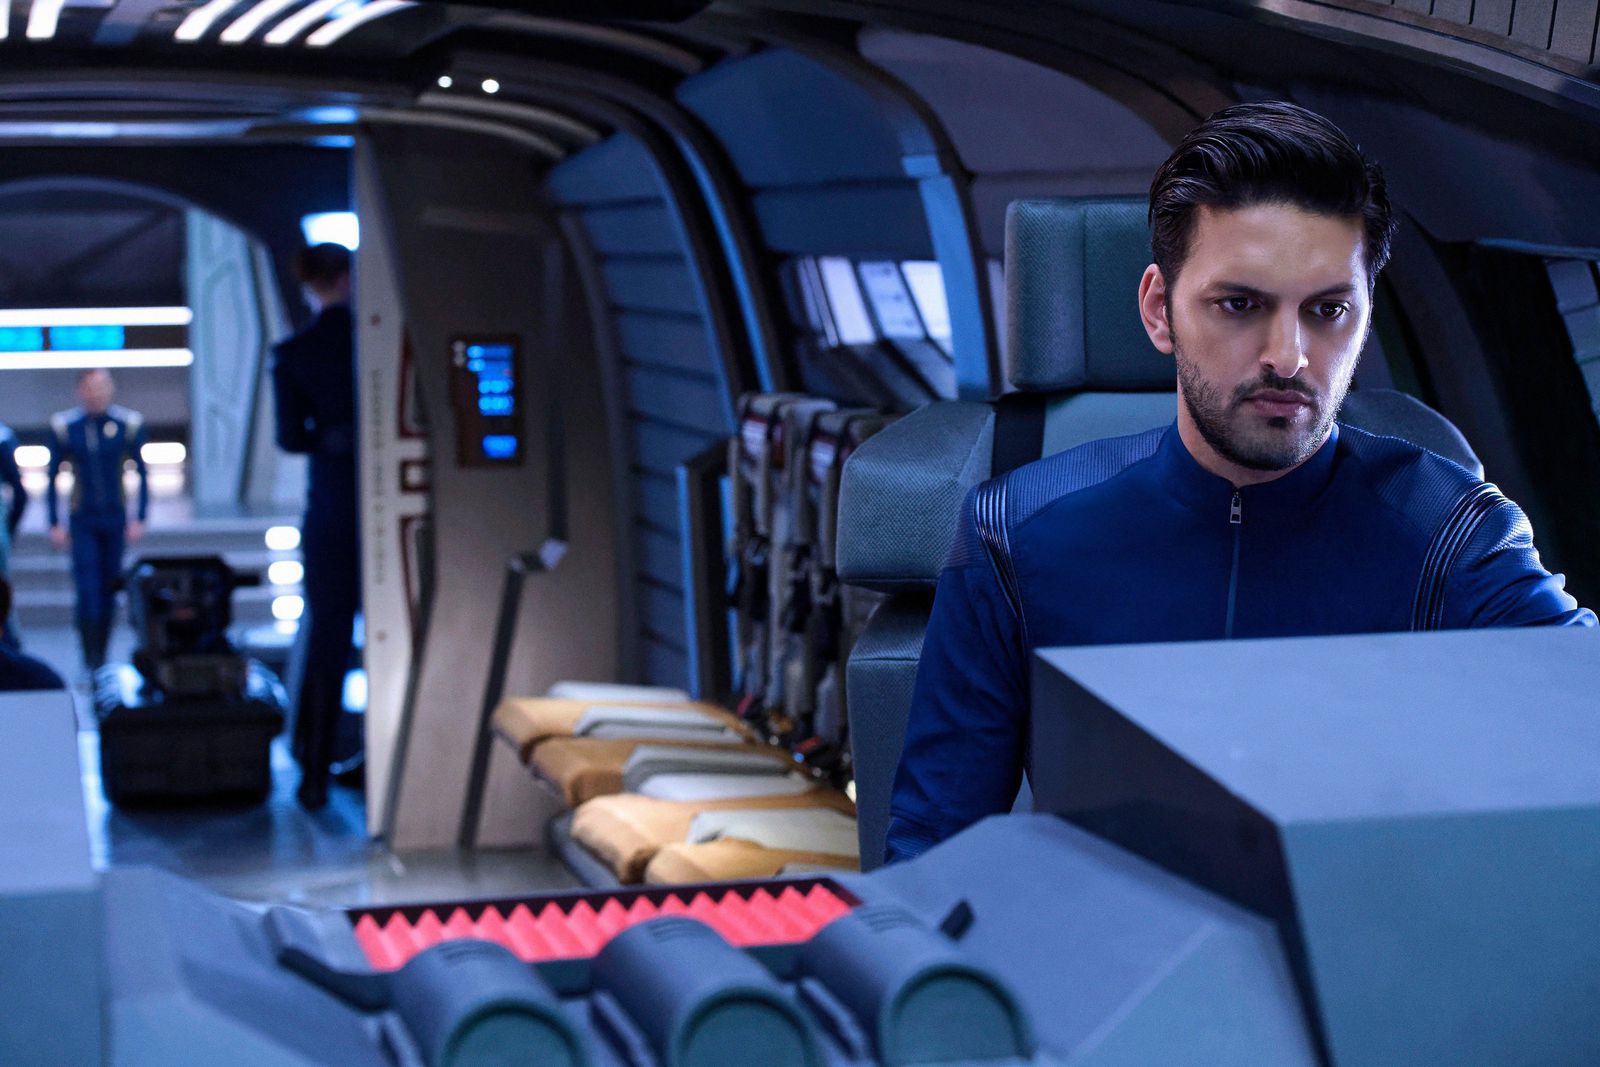 Star Trek: Discovery’s Shazad Latif Explains Why Ash Tyler is More than an ‘Outdated Classic Male Action Hero’ (The Verge)